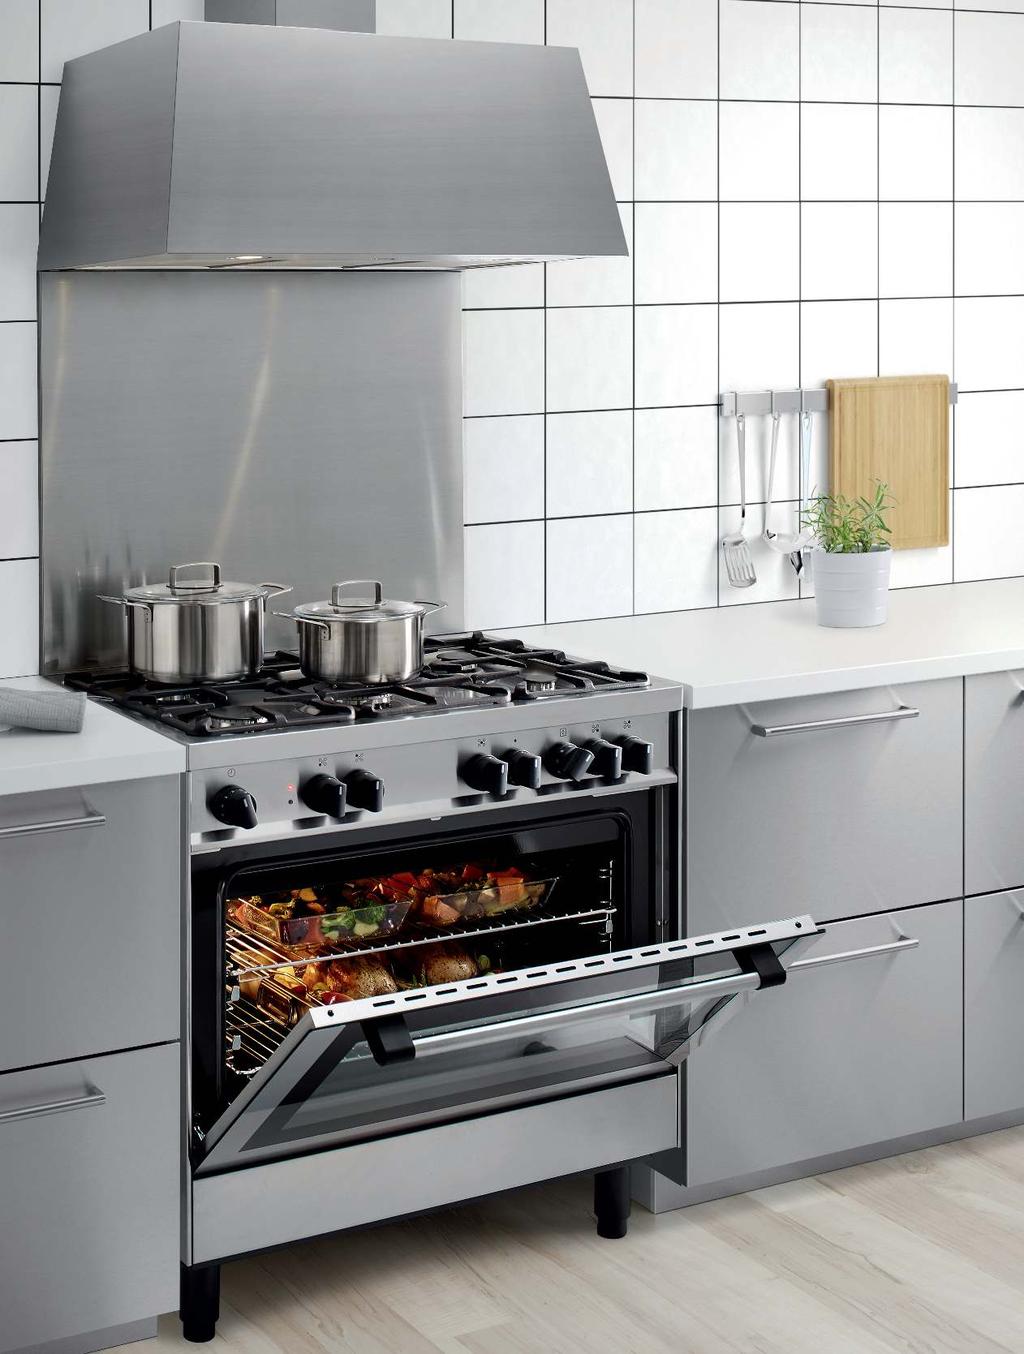 COOKERS Our freestanding cookers offer a convenient way for you to get a quality cooktop and oven combined.